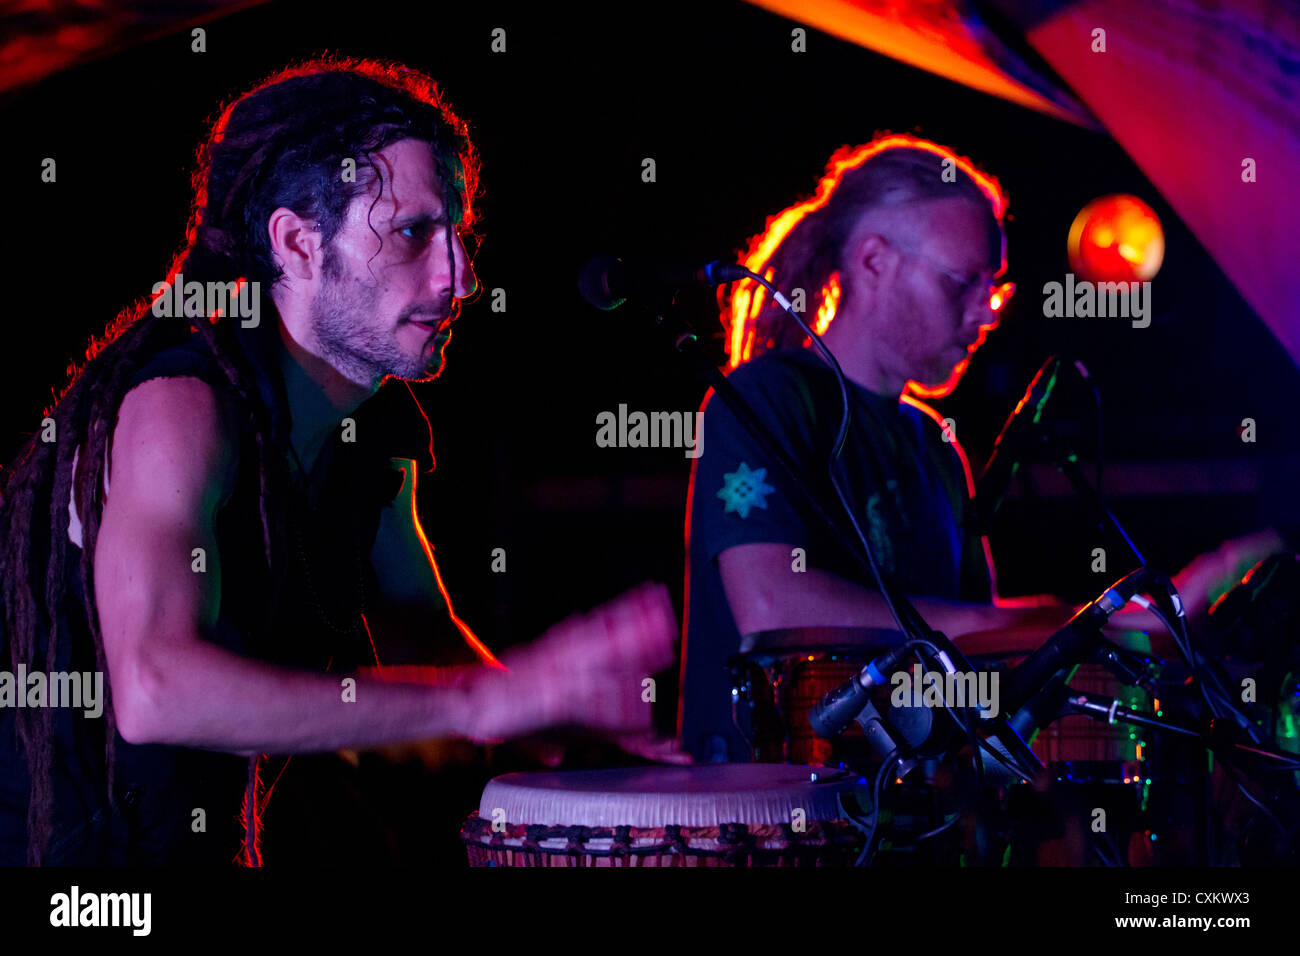 Hilight Tribe at Lost Theory Festival 2012. Stock Photo